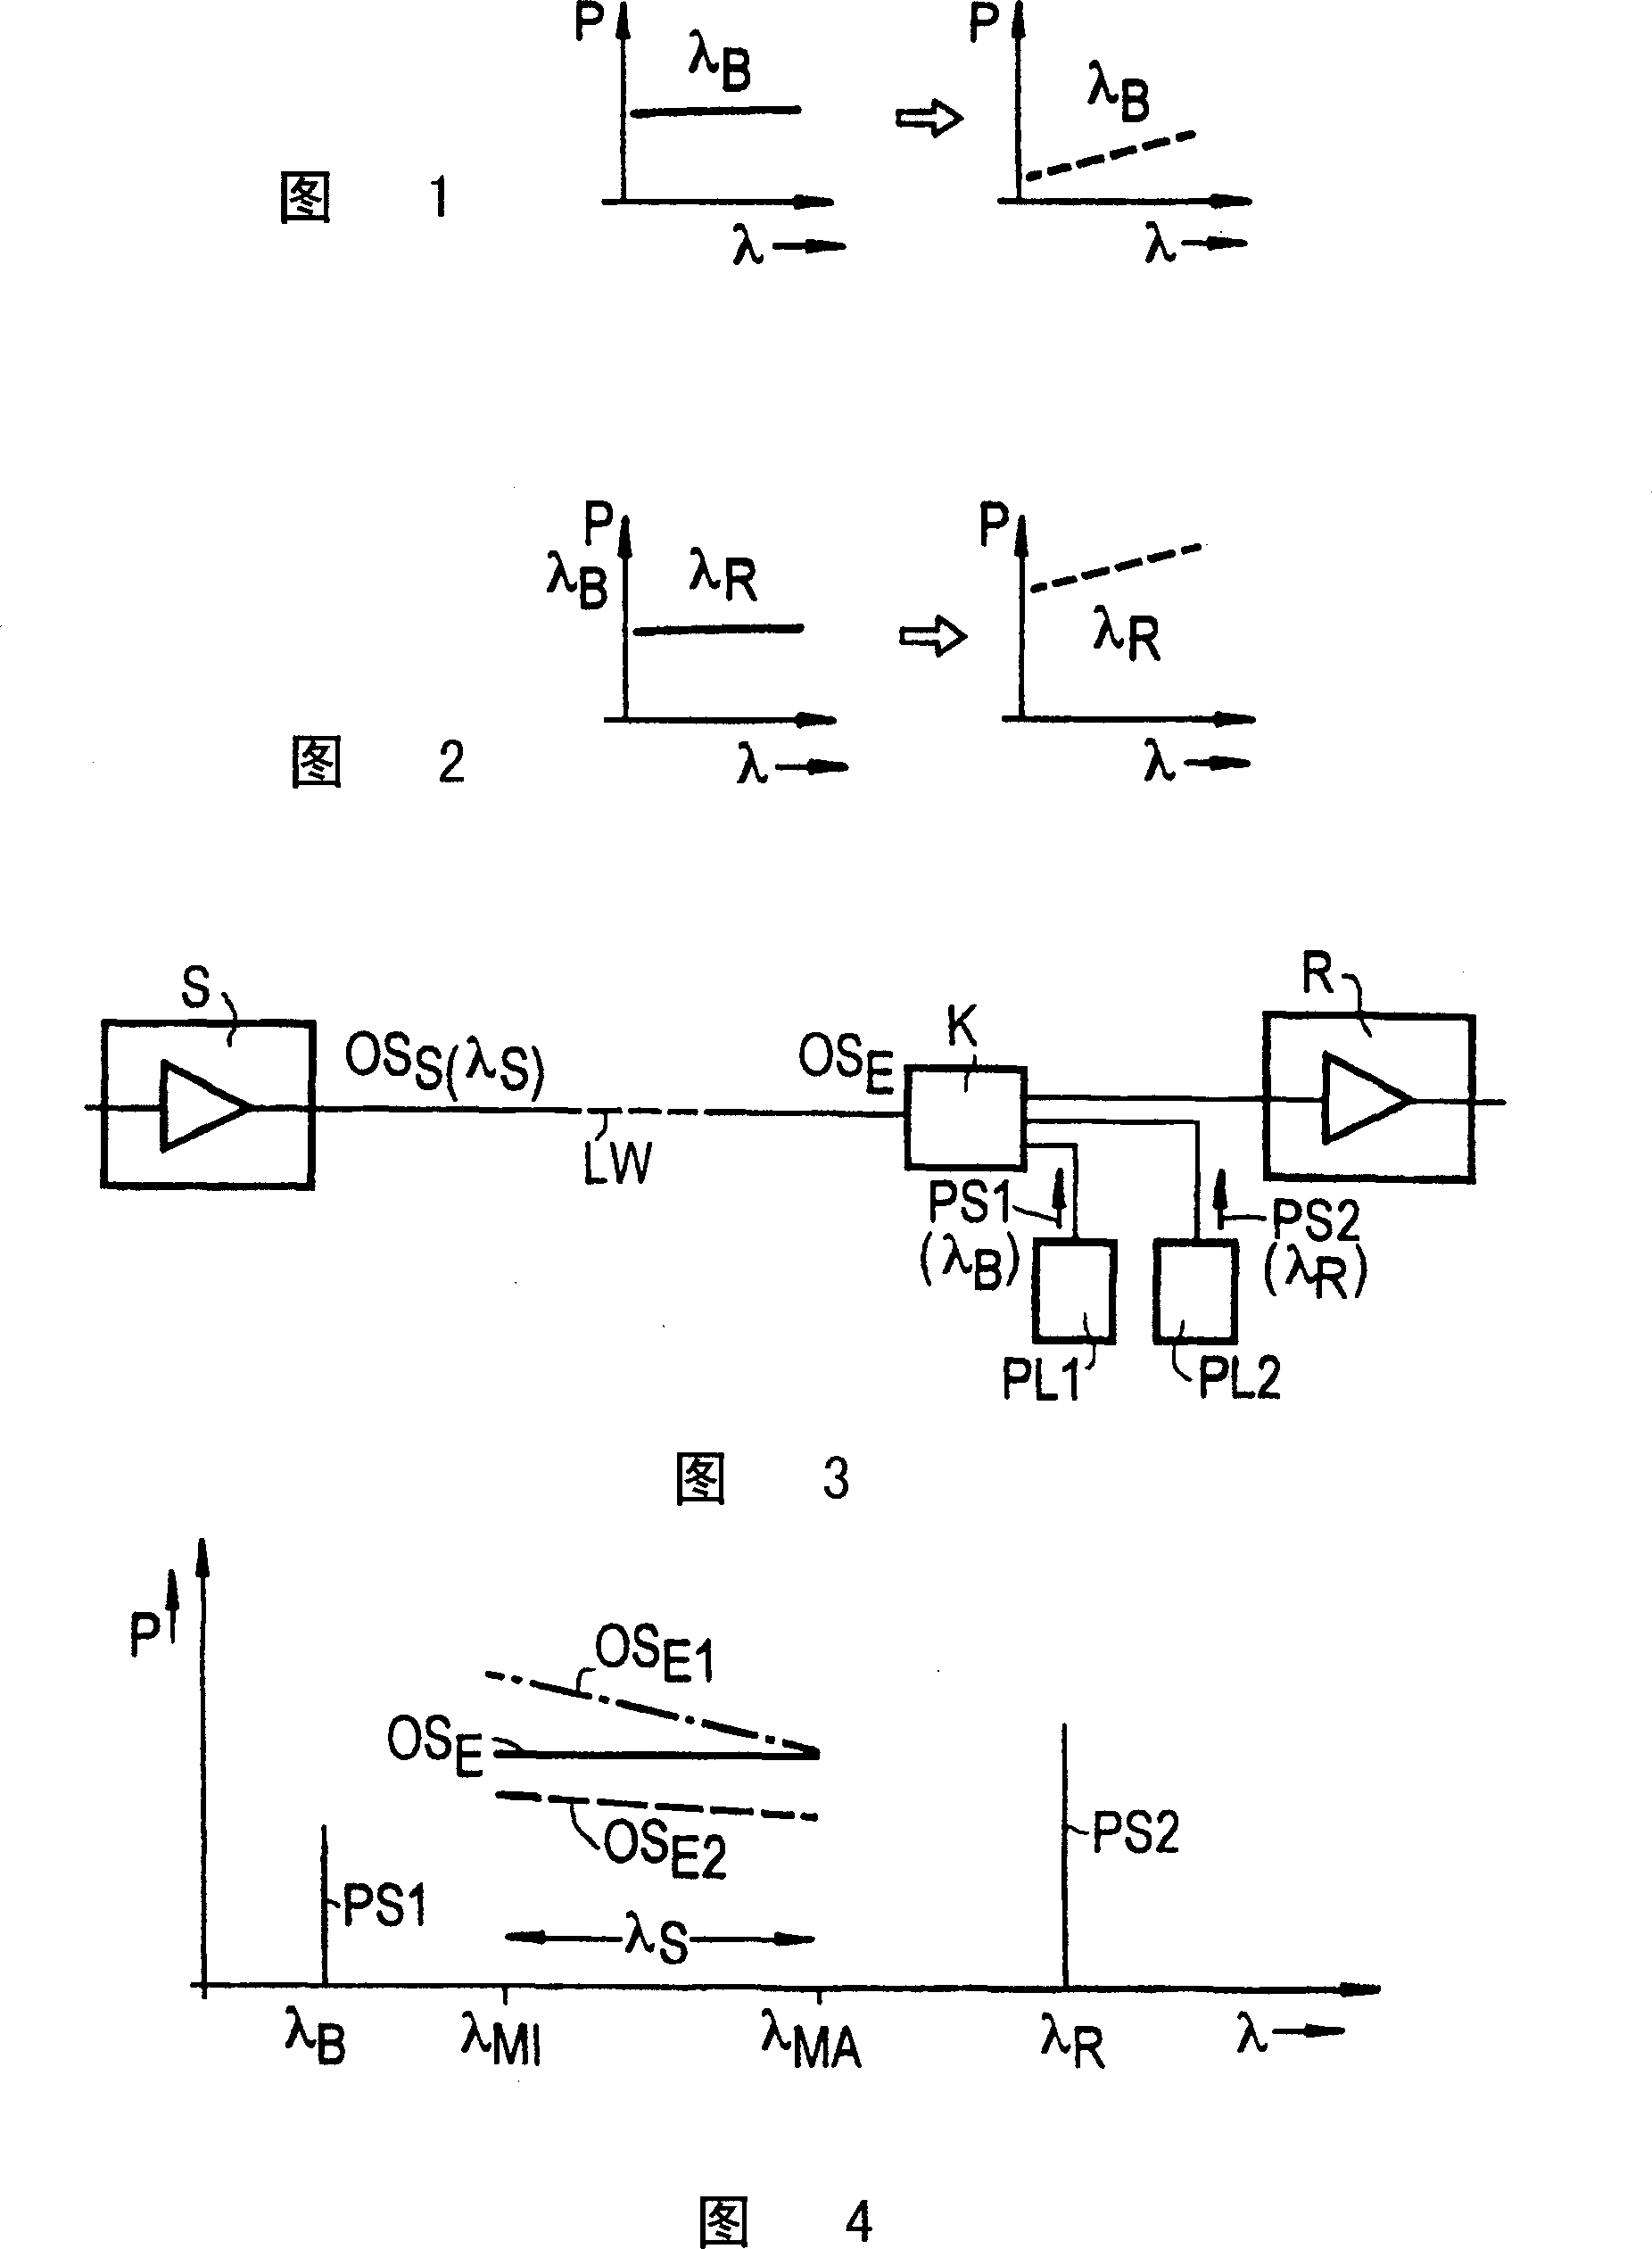 Method for adjusting the level of optical signals